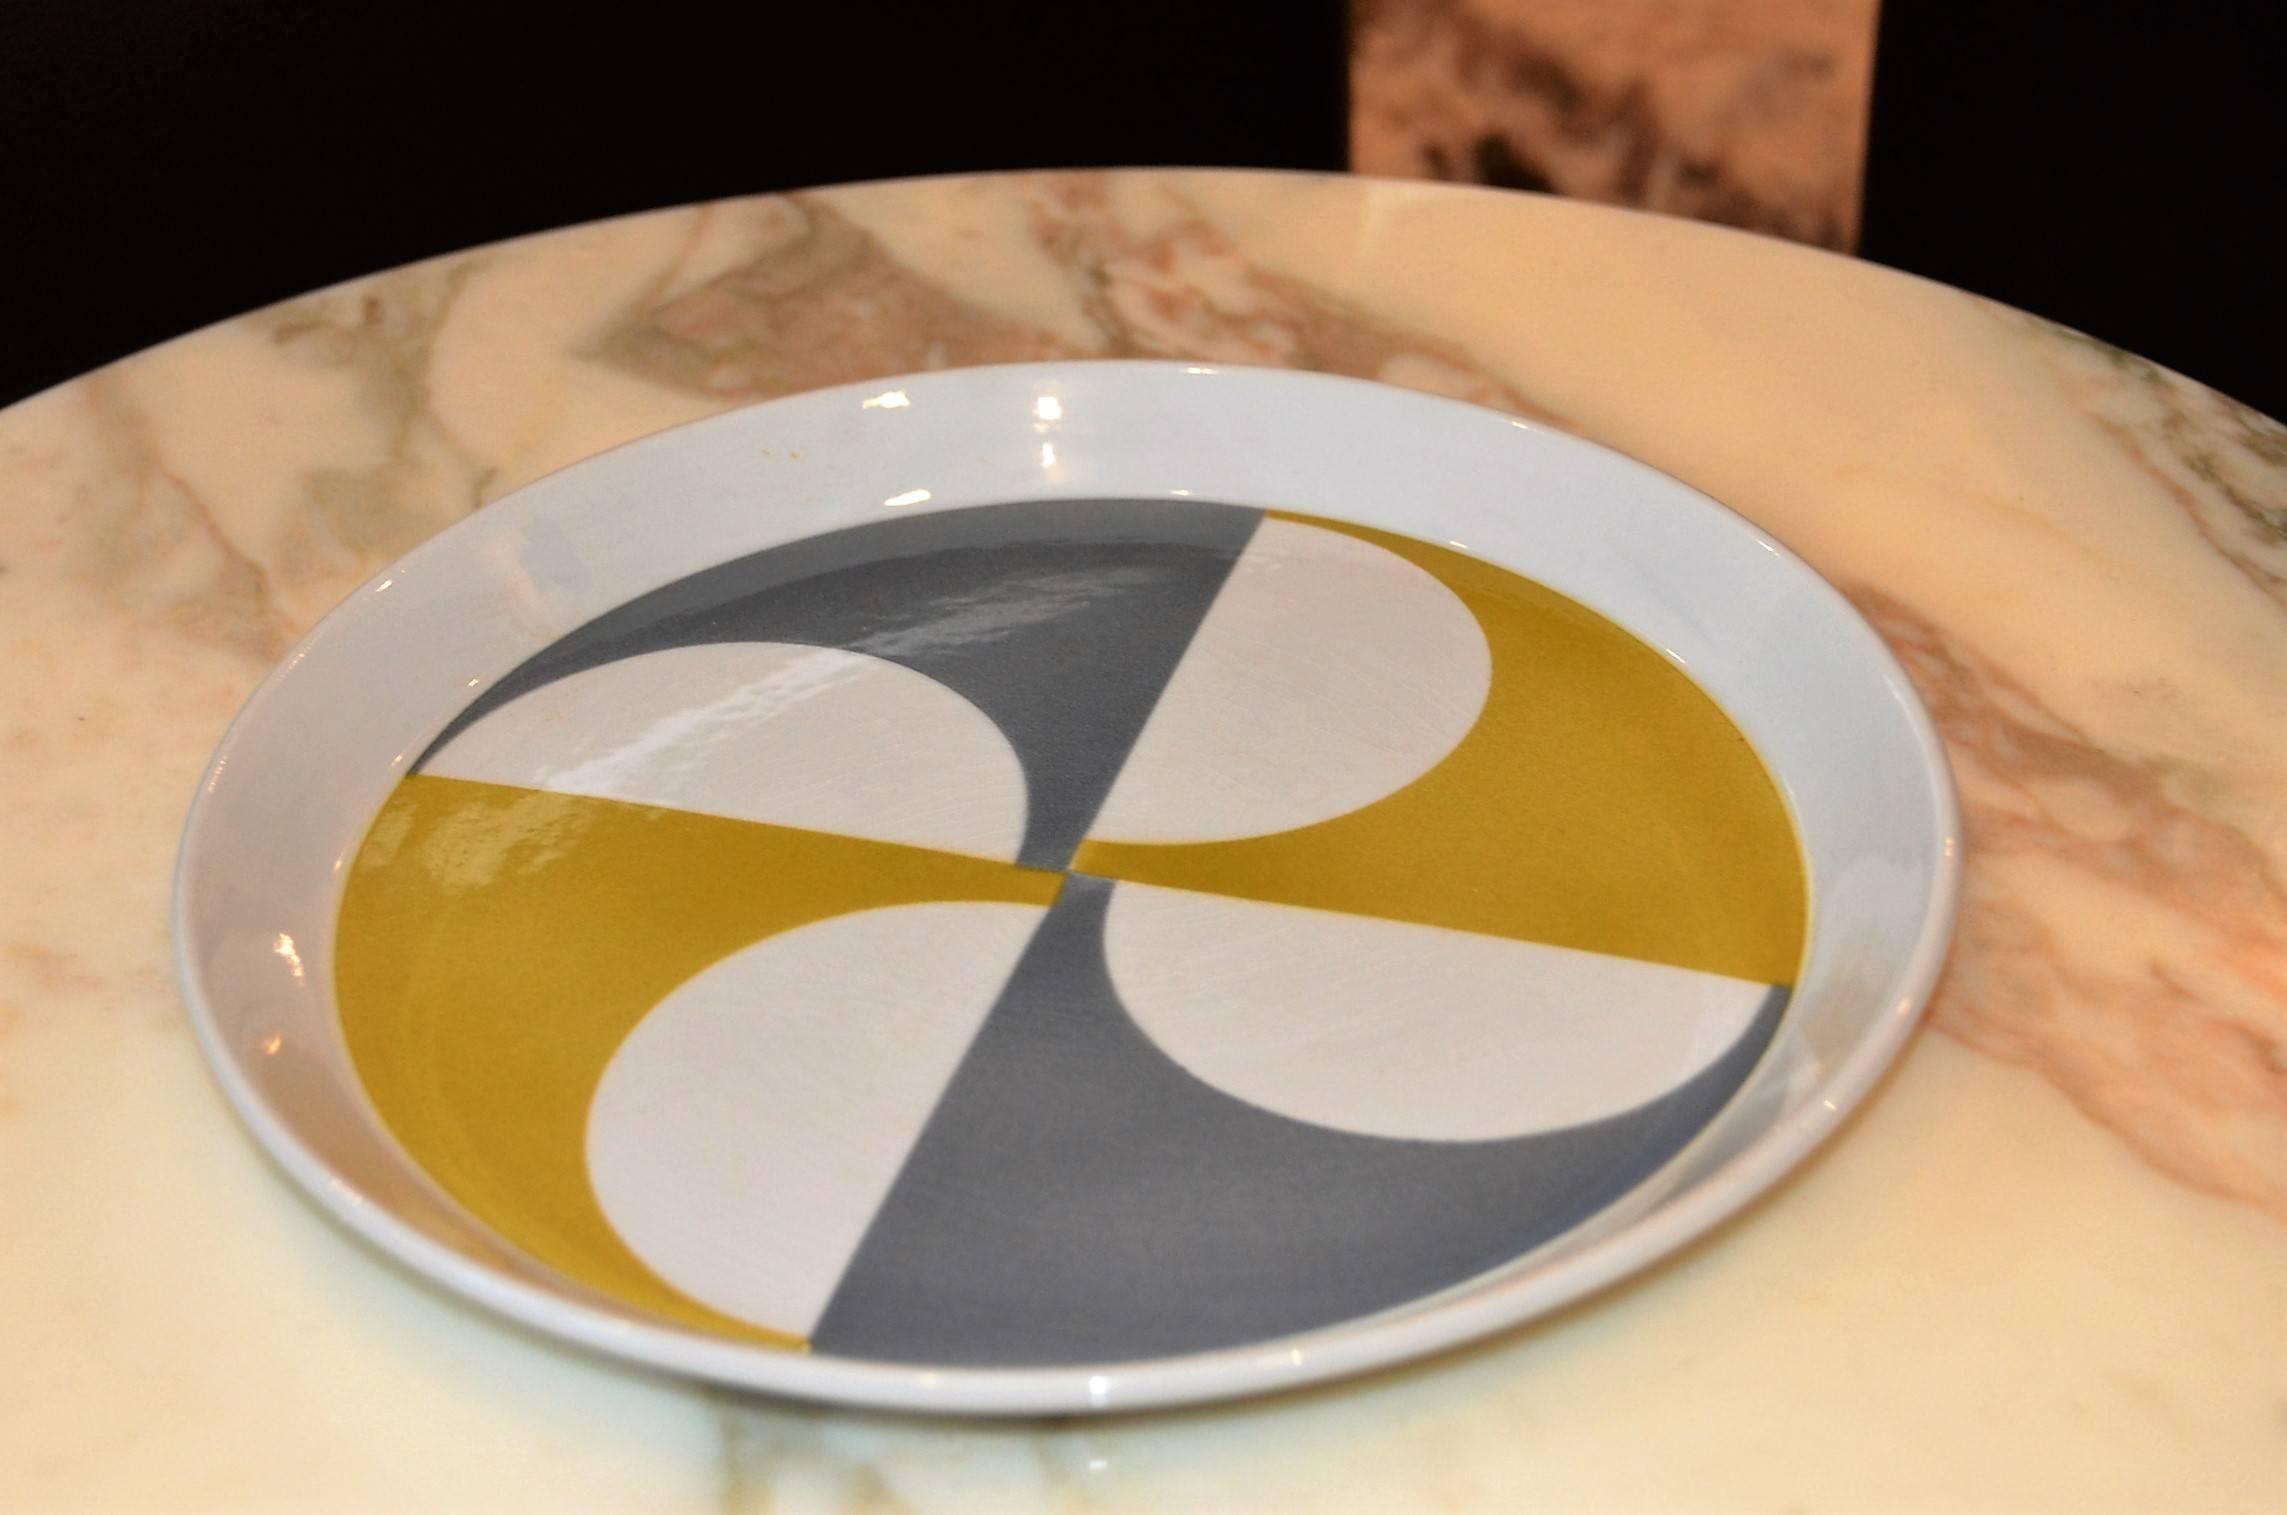 Modernist colorful plate, designed by Gio Ponti for Ceramica Franco Pozzi. The colors create a powerful and dramatic look of energy. It's in perfect conditions and marked on the back.

Free shipping:

Reference: 
Gio Ponti, Fulvio Irace, Page